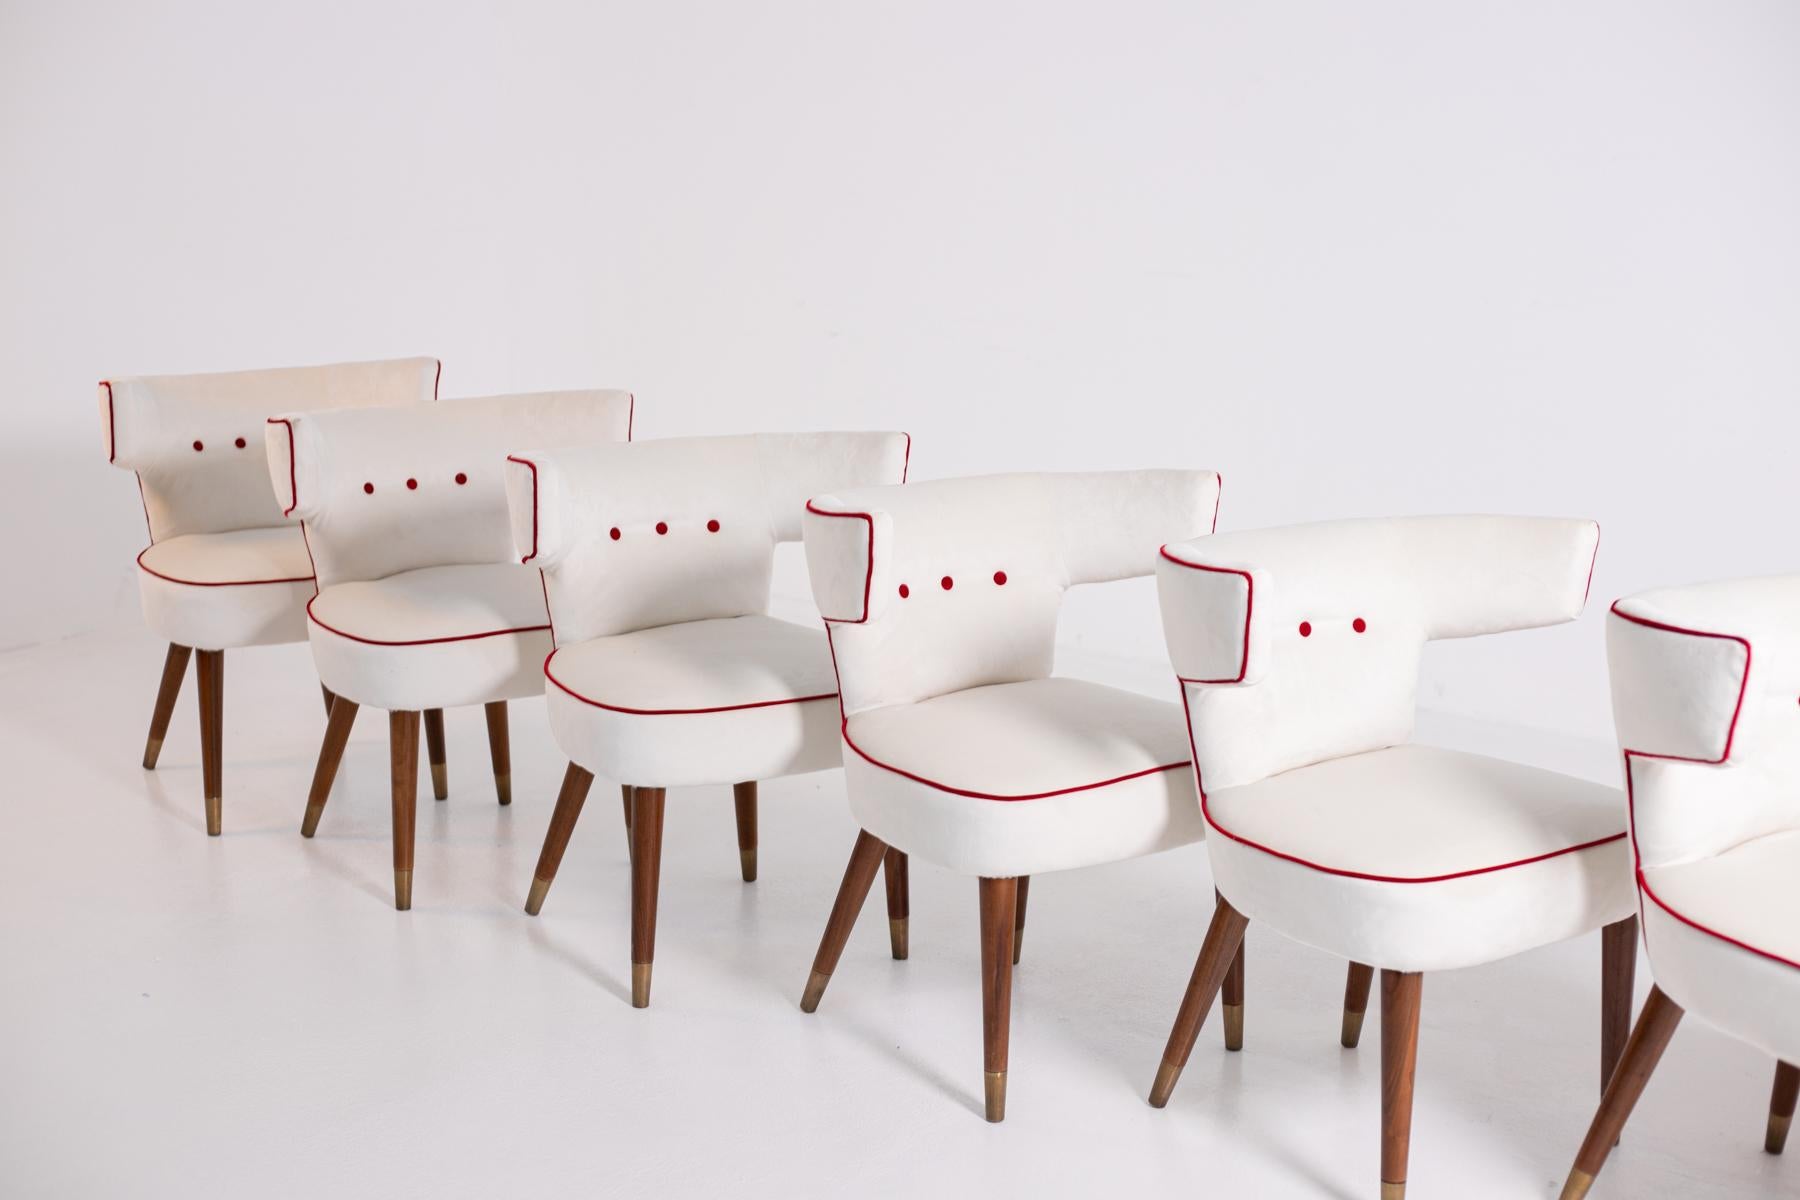 Elegant set by Gio Ponti and Nino Zoncada made for the Giulio Cesare ship in the 1950s. The set of chairs was produced by Cassina and is the model 538. The set consists of 6 chairs finely restored and reupholstered in elegant white velvet with red